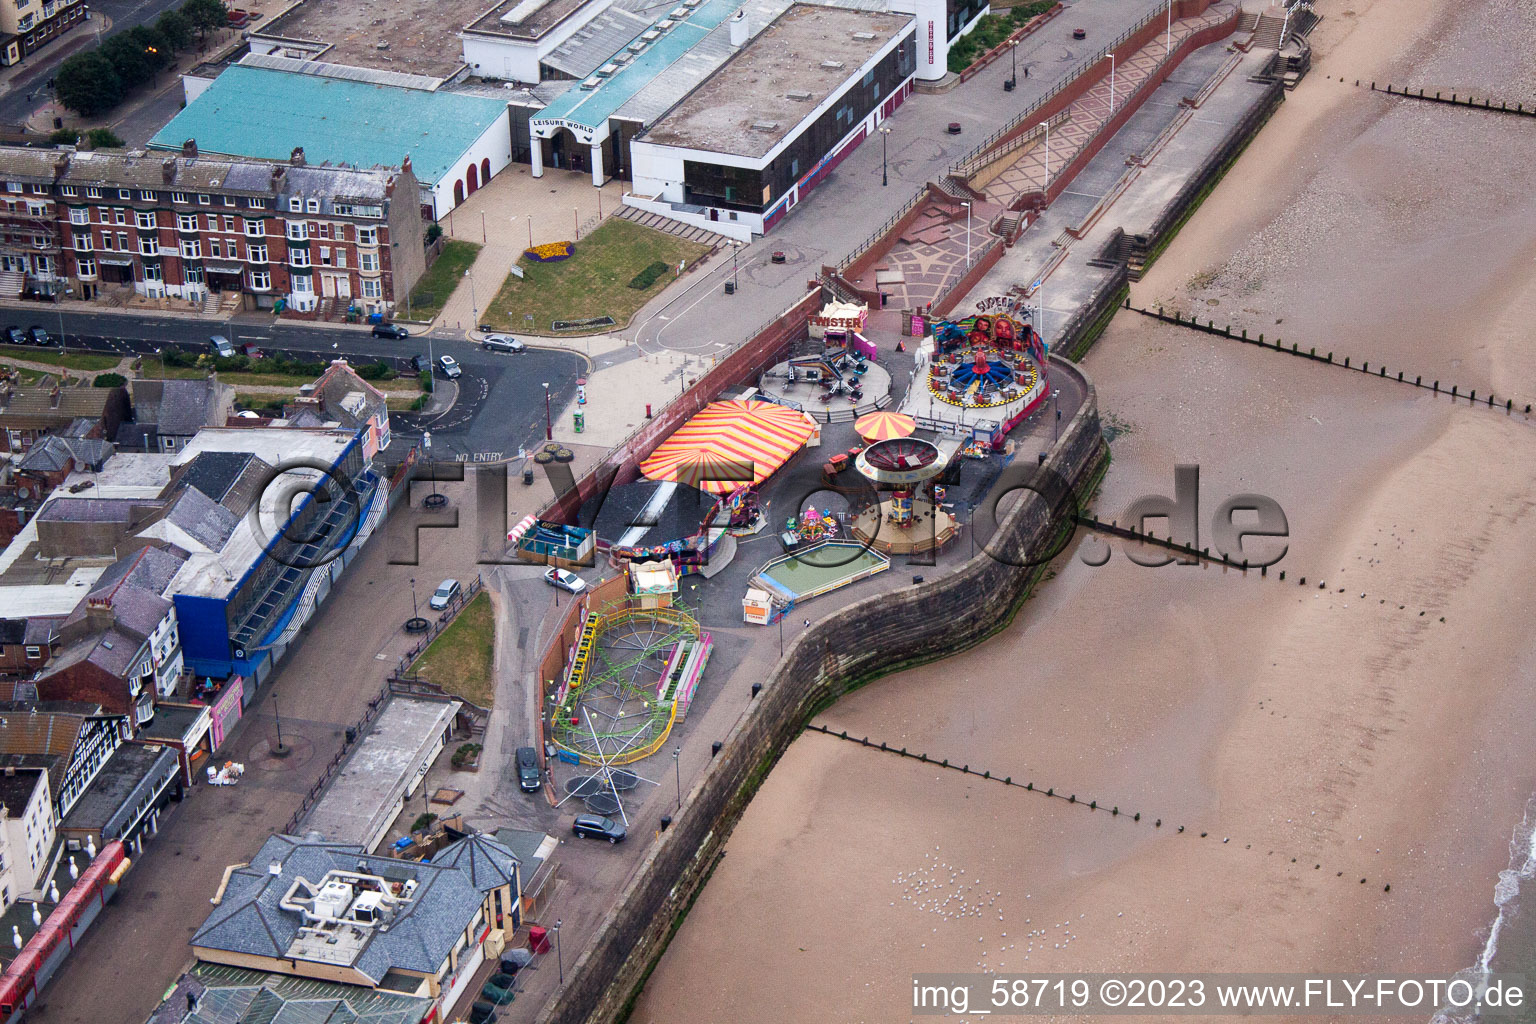 Bridlington in the state England, Great Britain from above